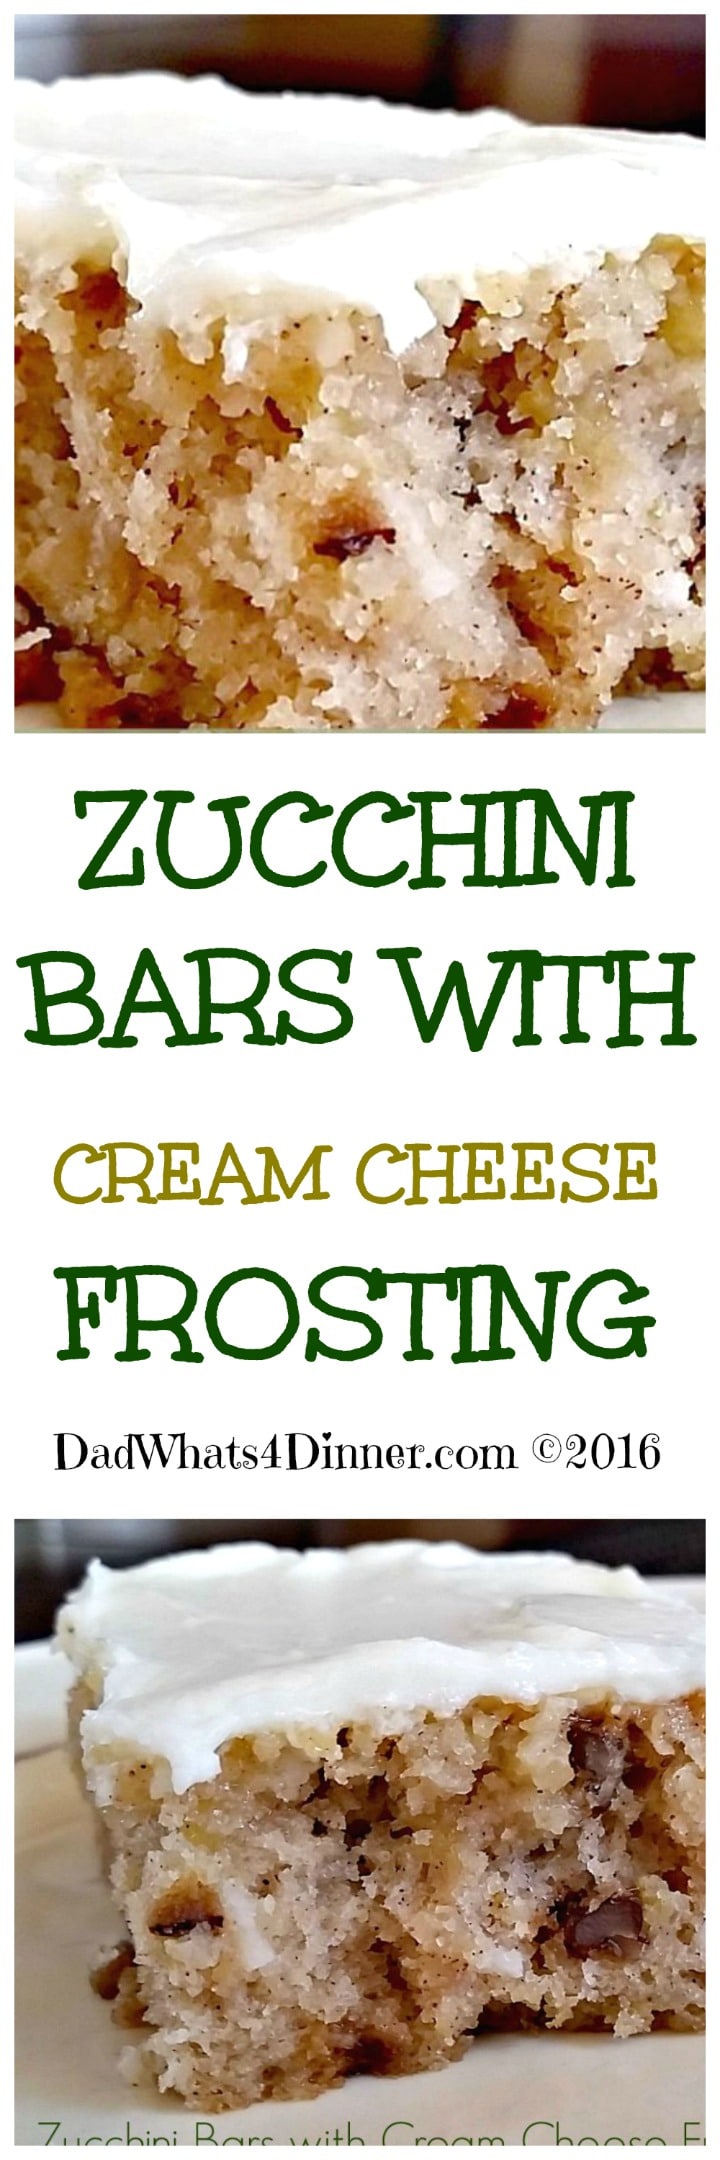 Pinterest image of Zucchini Bars with Cream Cheese Frosting from dadwhats4dinner.com